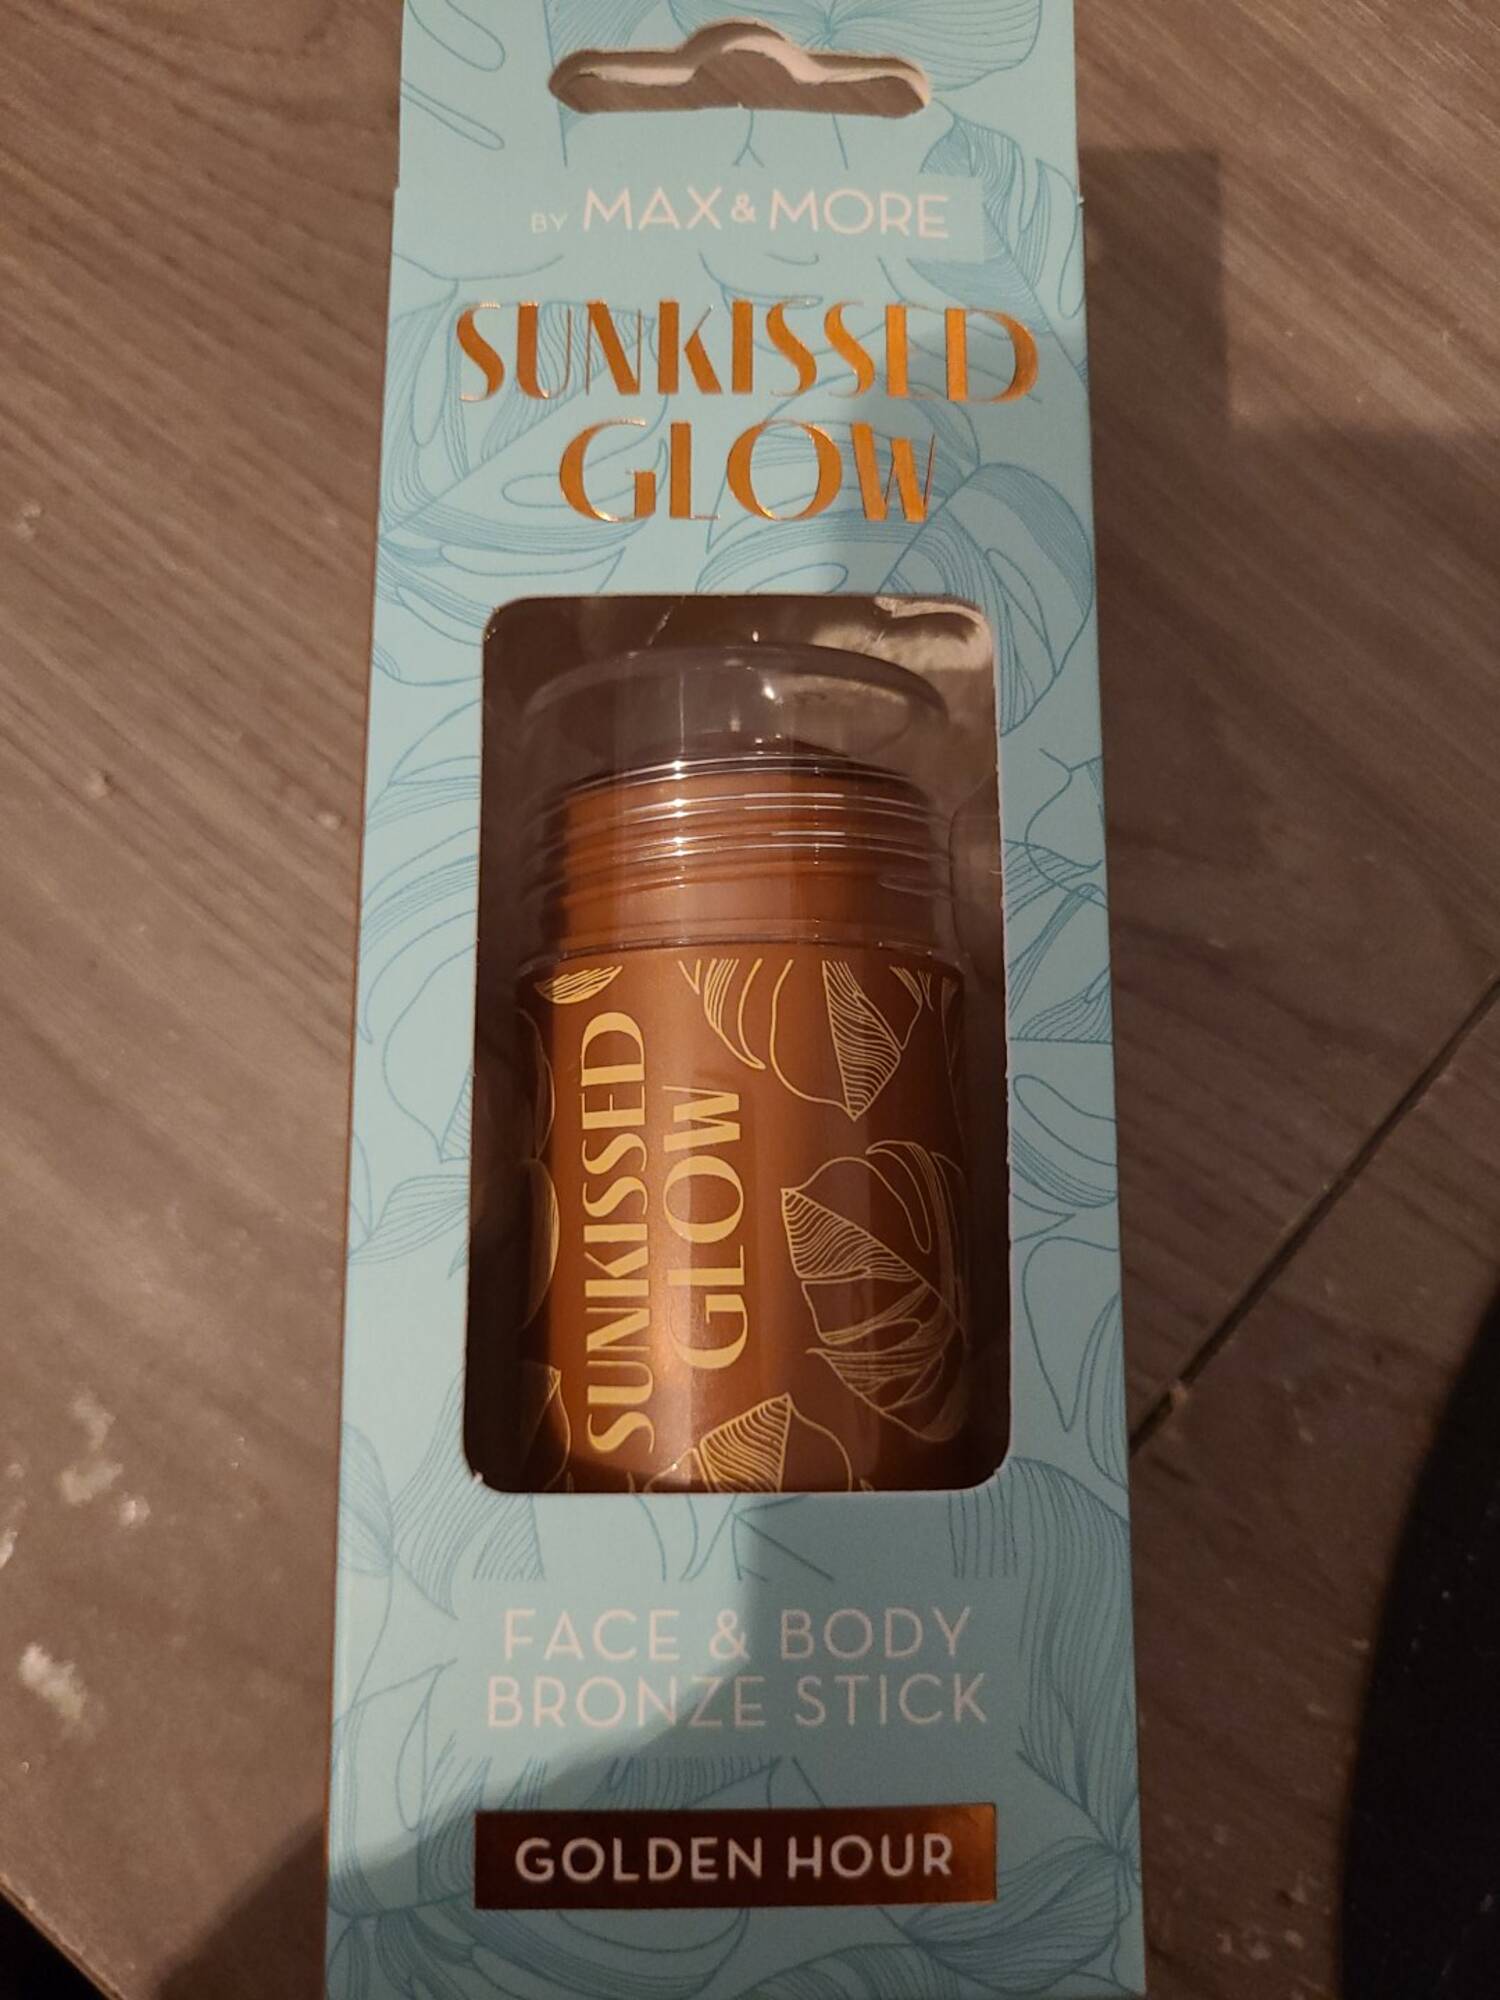 MAX & MORE - Sunkissed glow - Face & body bronze stick